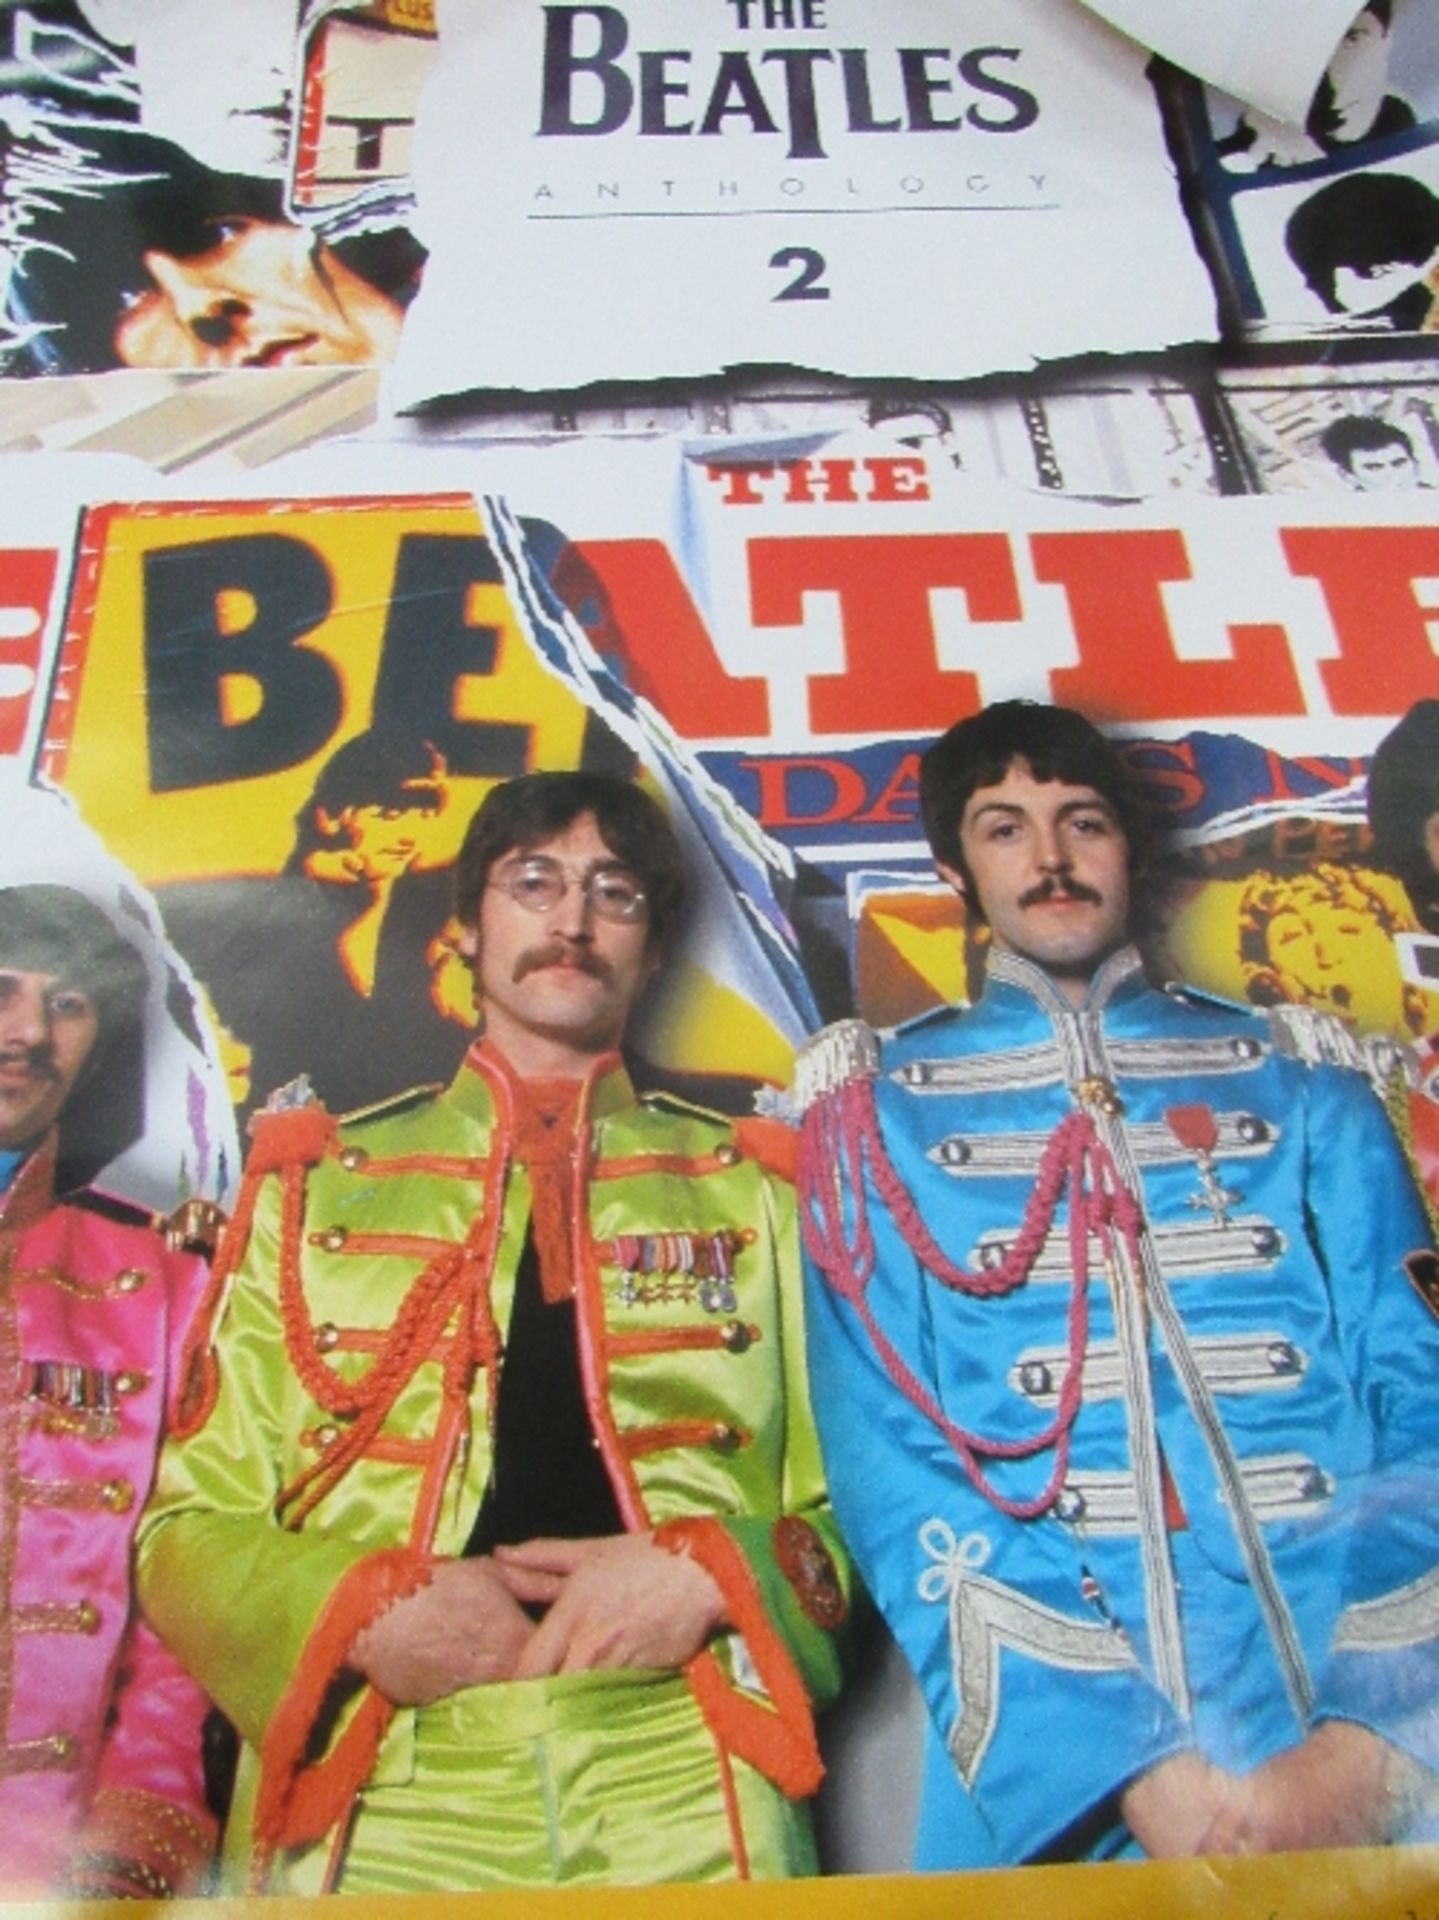 4 Beatles Anthology posters including un-issued Anthology 3 poster. Estimate £20-30. - Image 2 of 5